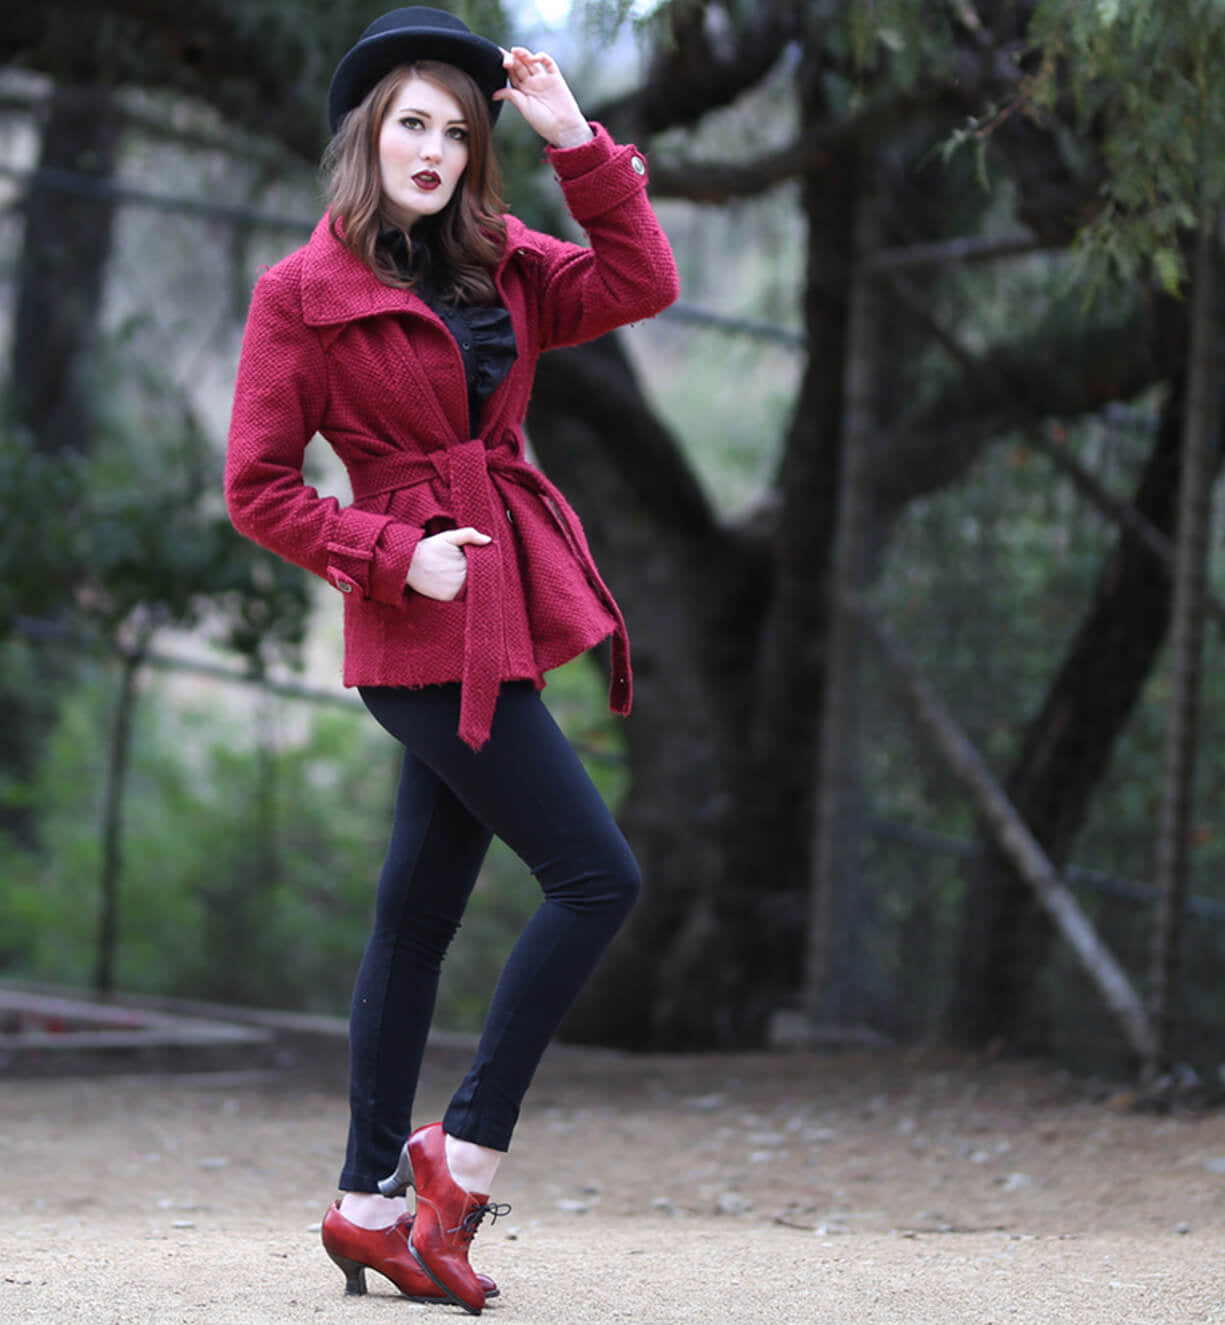 A woman in a red coat with a neutral look, posing in a wooded area wearing Oak Tree Farms leather shoes with lace-up front, named Janet.